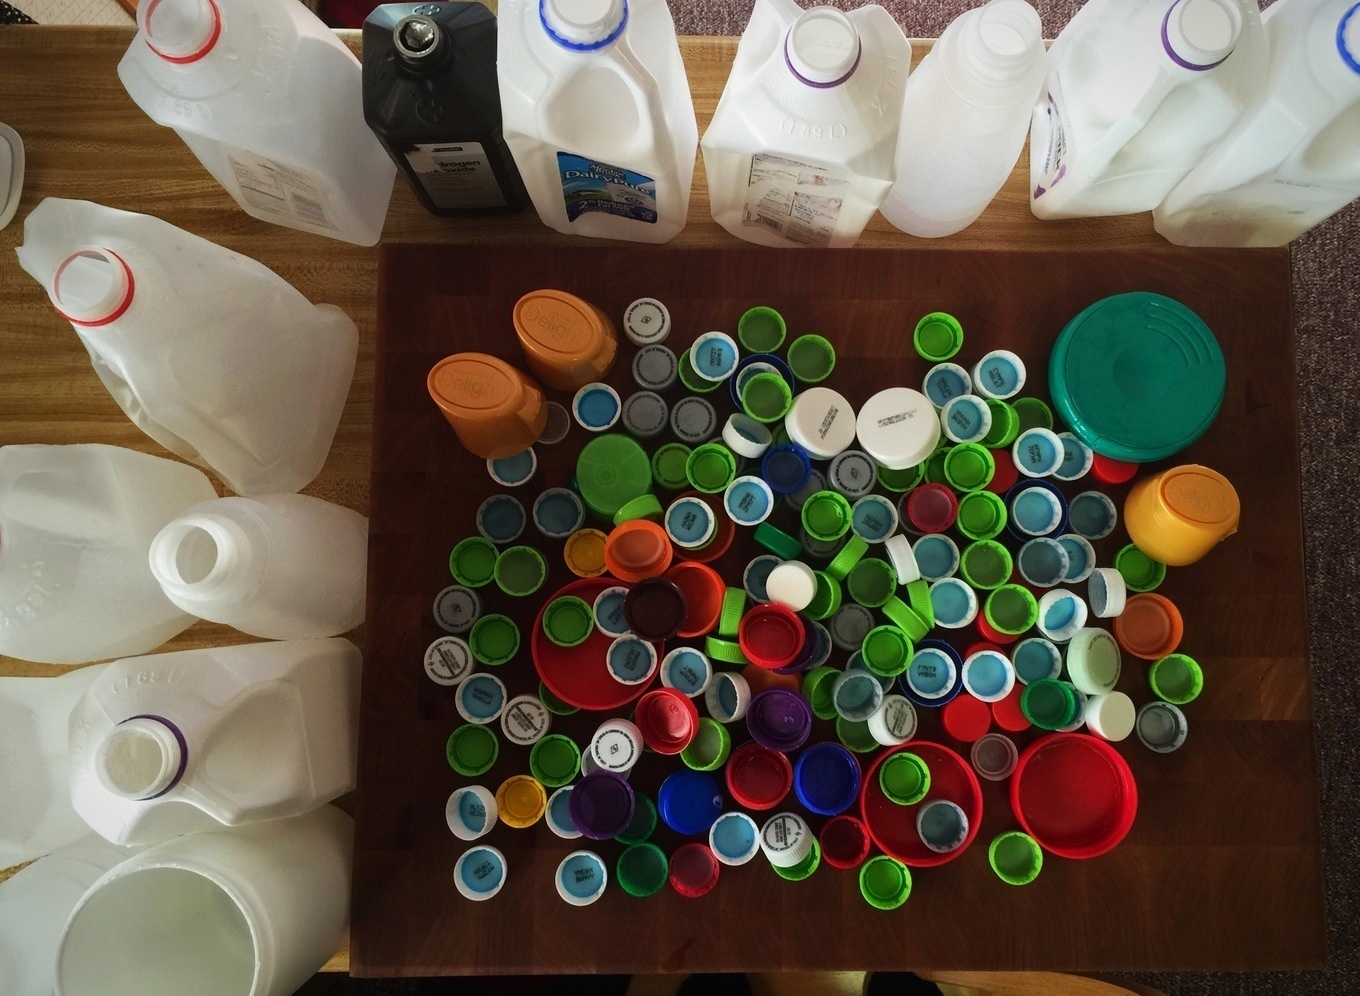 Over the course of a few months, this clever DIY'er saved any HDPE marked bottles, as well as plenty of container caps.